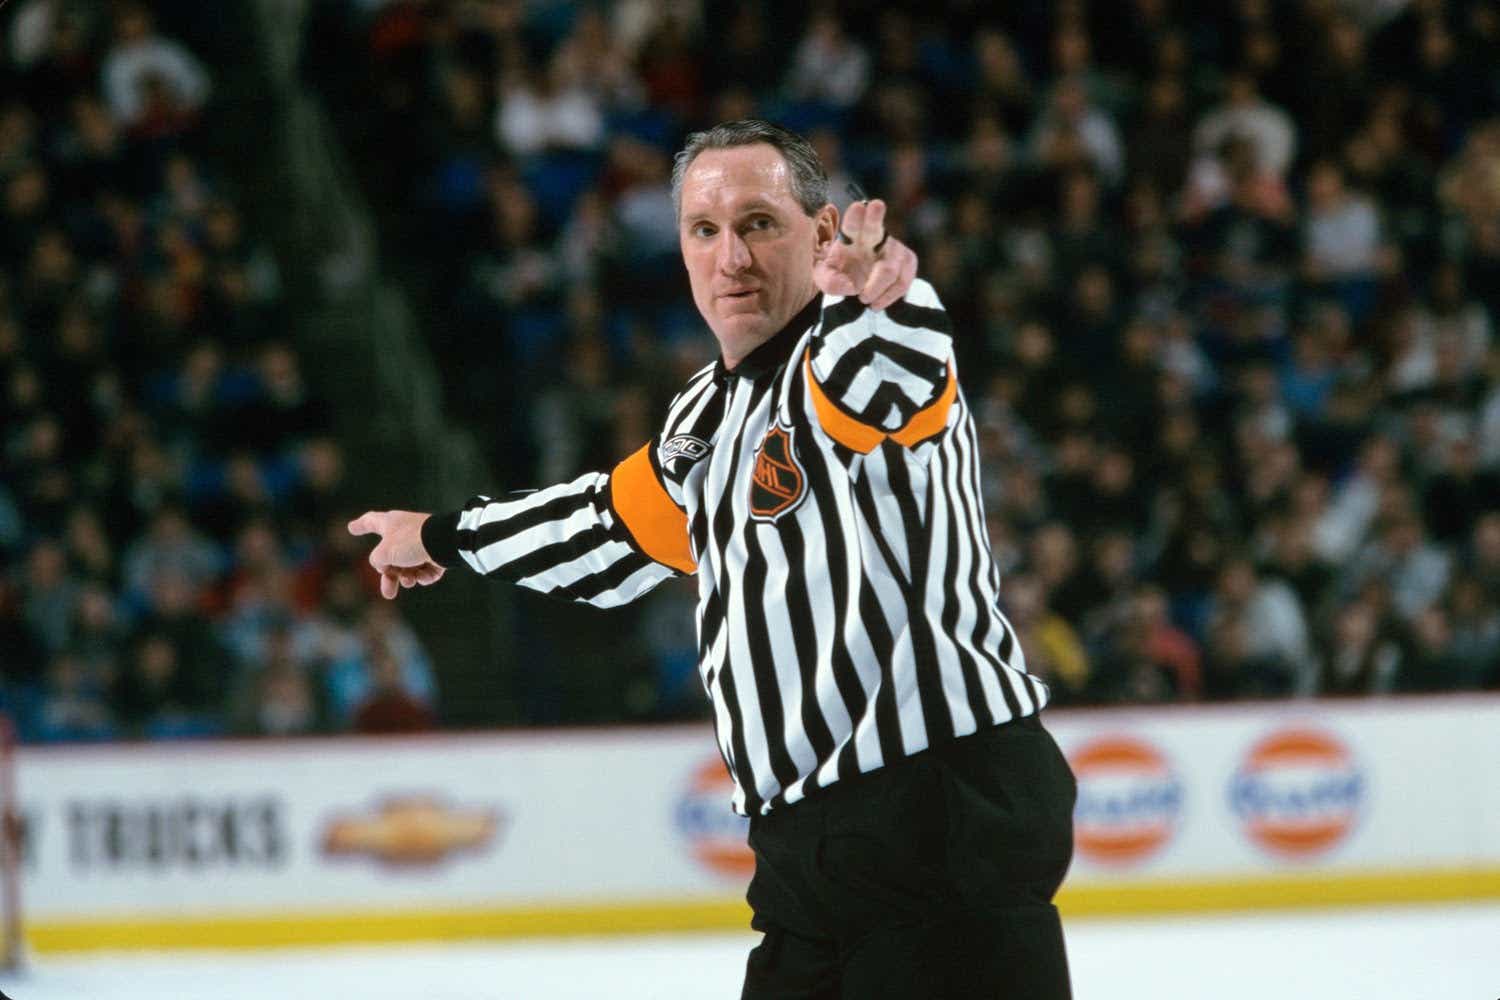 Hockey referee Paul Stewart on the ice during a game